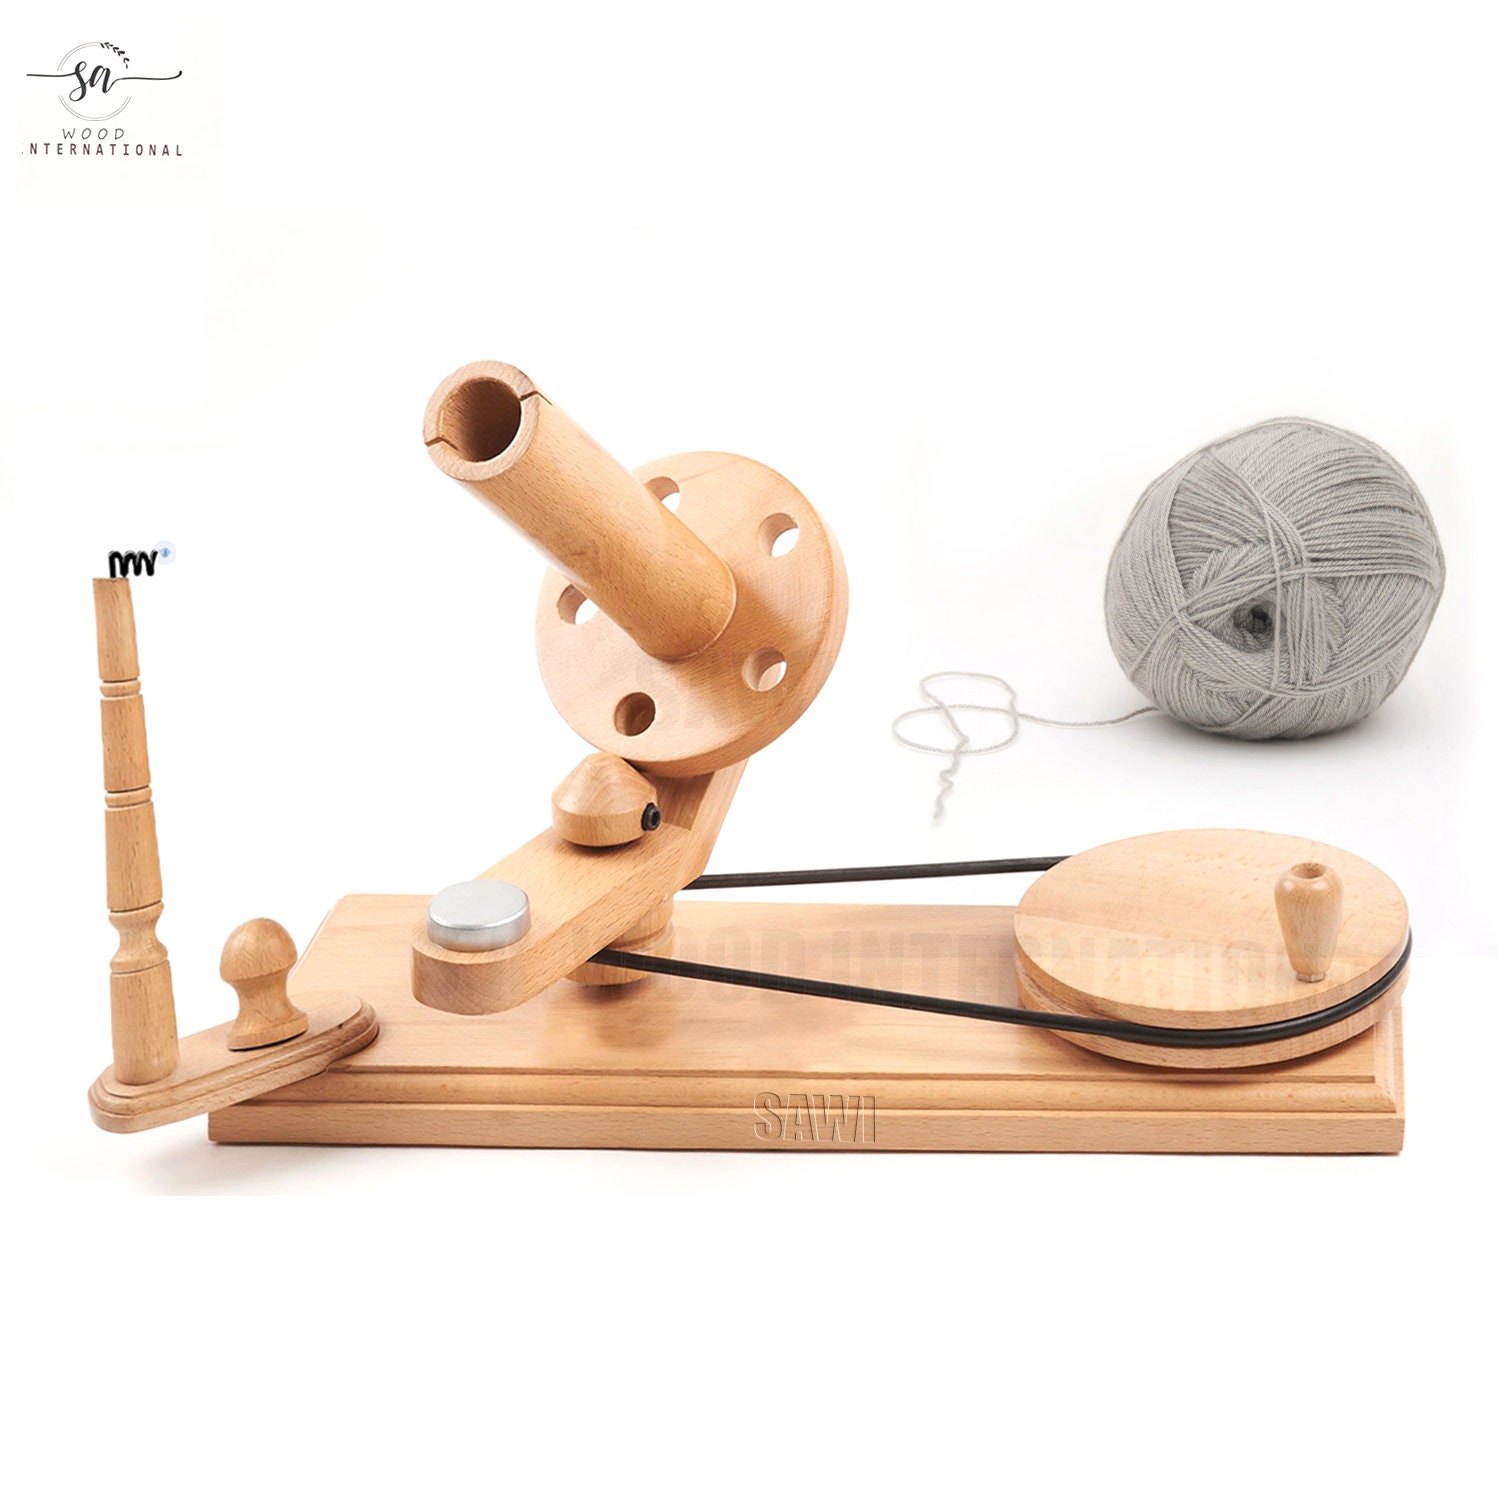 Yarn Winder and Swift Yarn Winder Combo Hand-operated Ball Winder Knitter's  Gifts Center Handcrafted Skein Winder Christmas Day Gift 